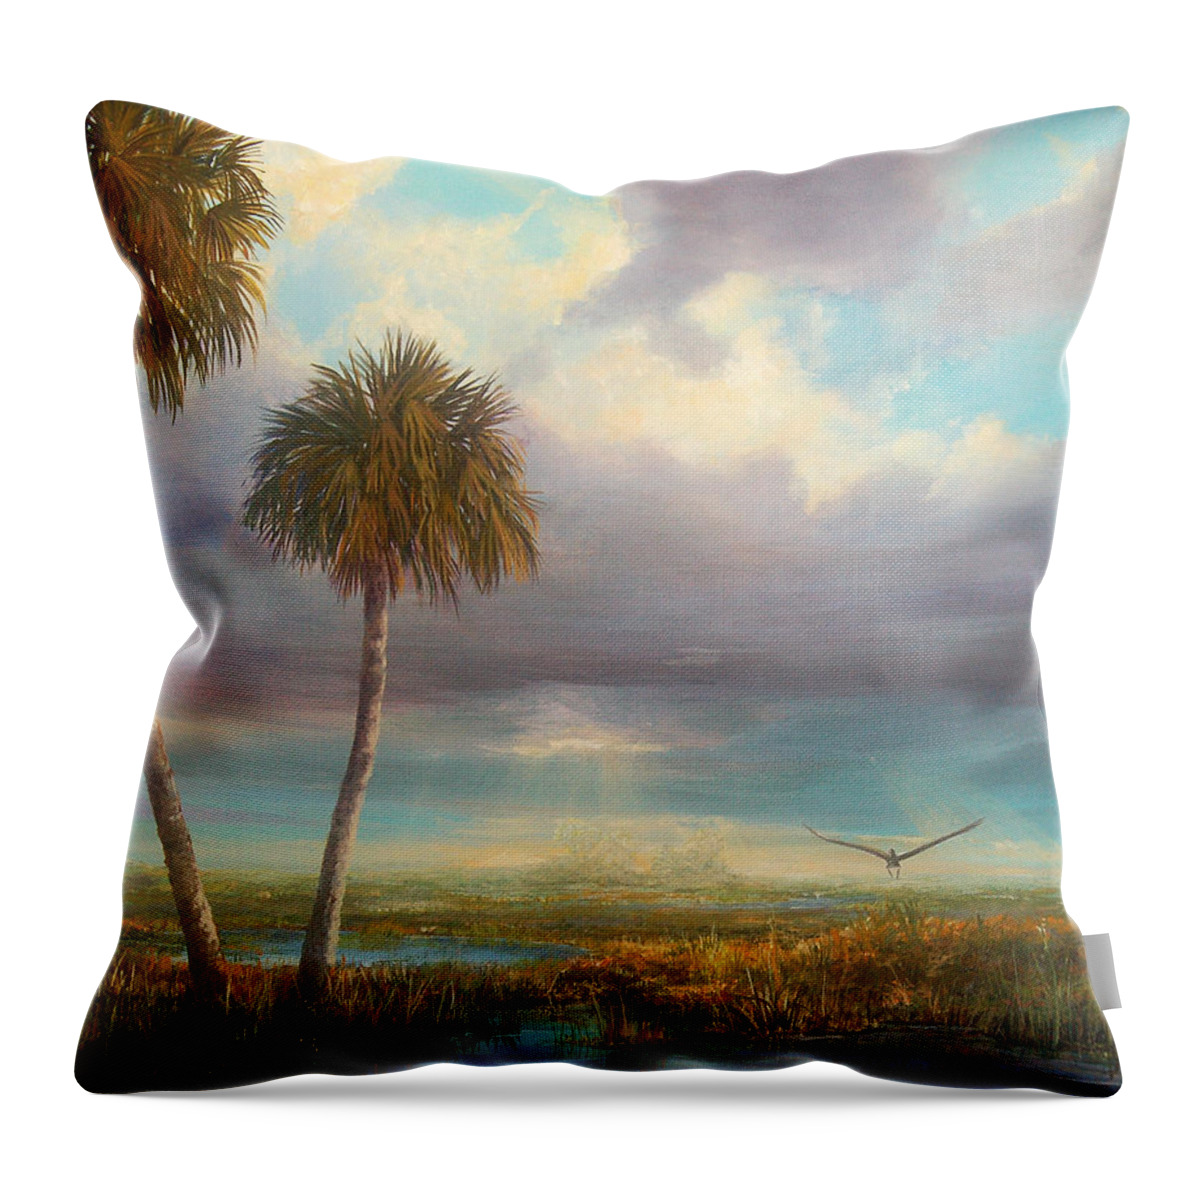 Florida Throw Pillow featuring the painting Marsh Launch by AnnaJo Vahle